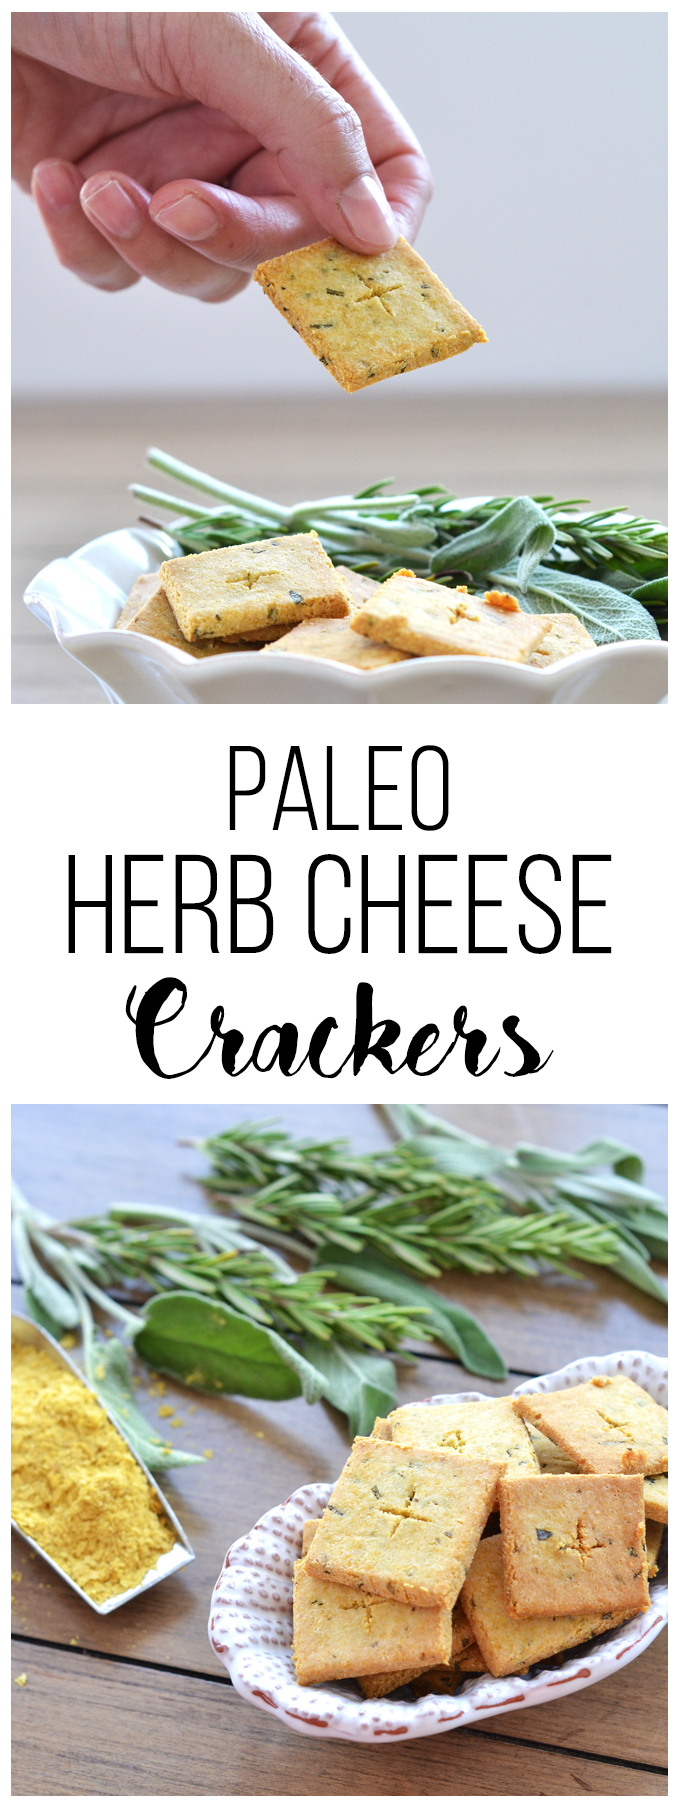 These Paleo Herb Cheese Crackers are the perfect grain free option for a flavorful and crisp snack!